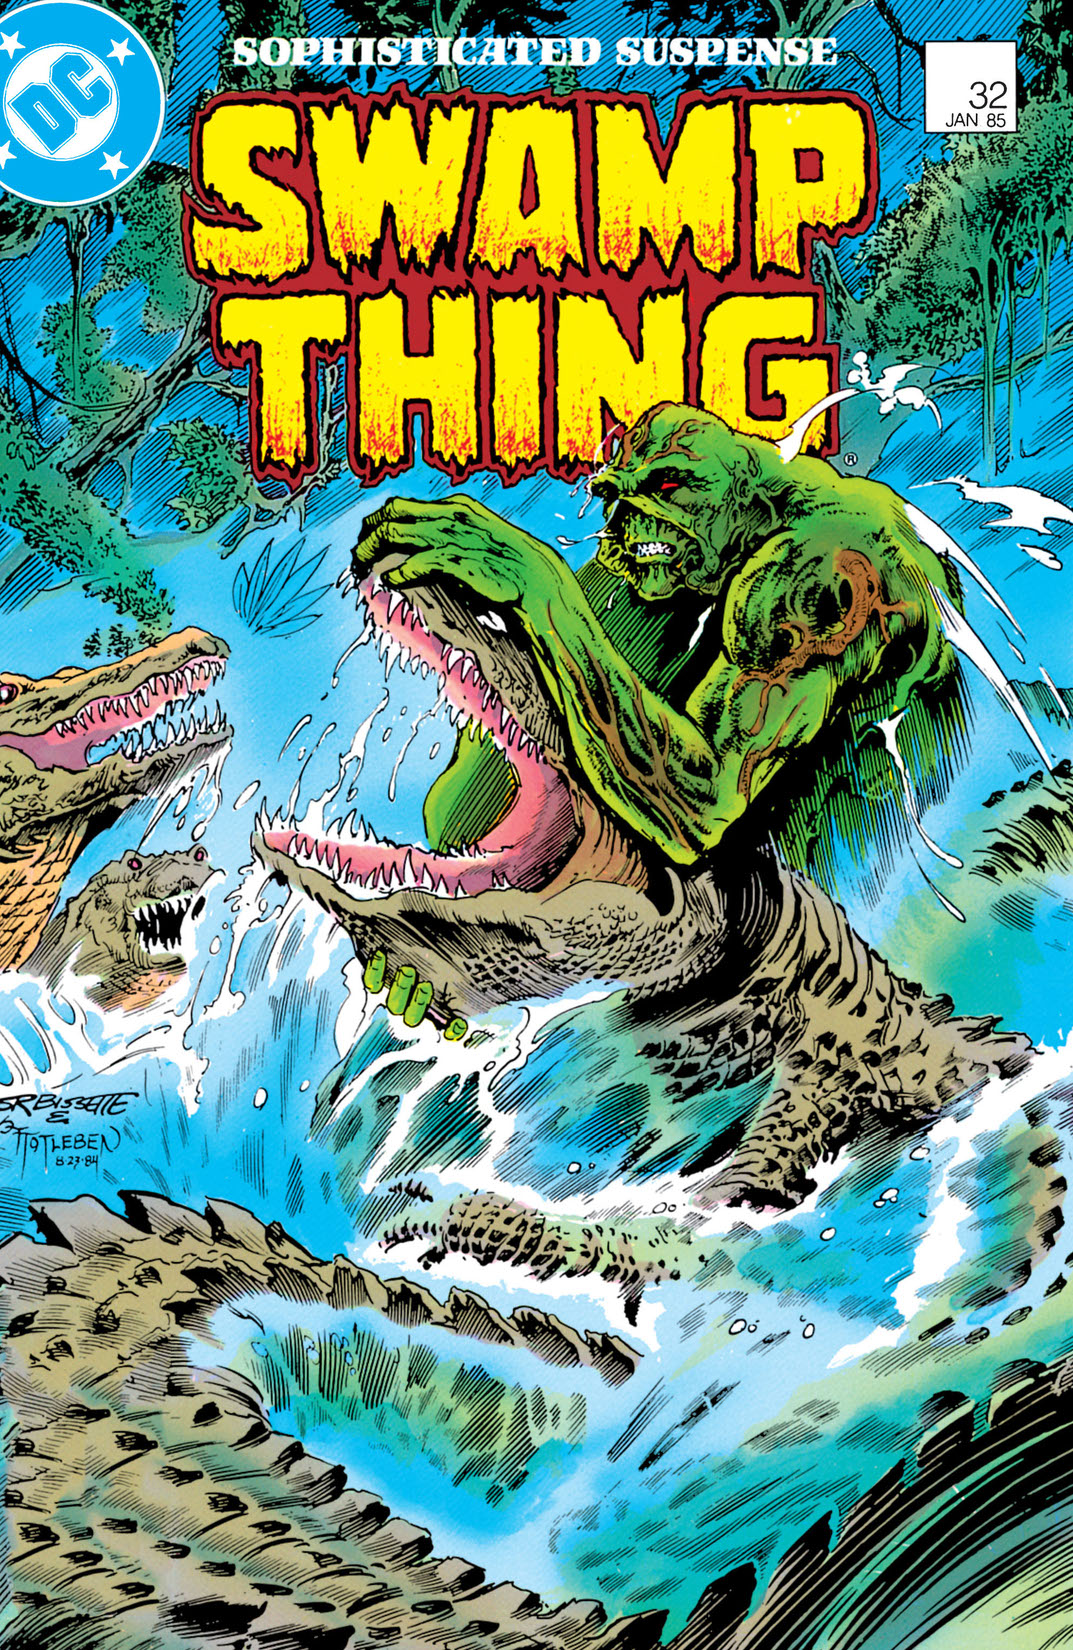 The Saga of the Swamp Thing (1982-) #32 preview images